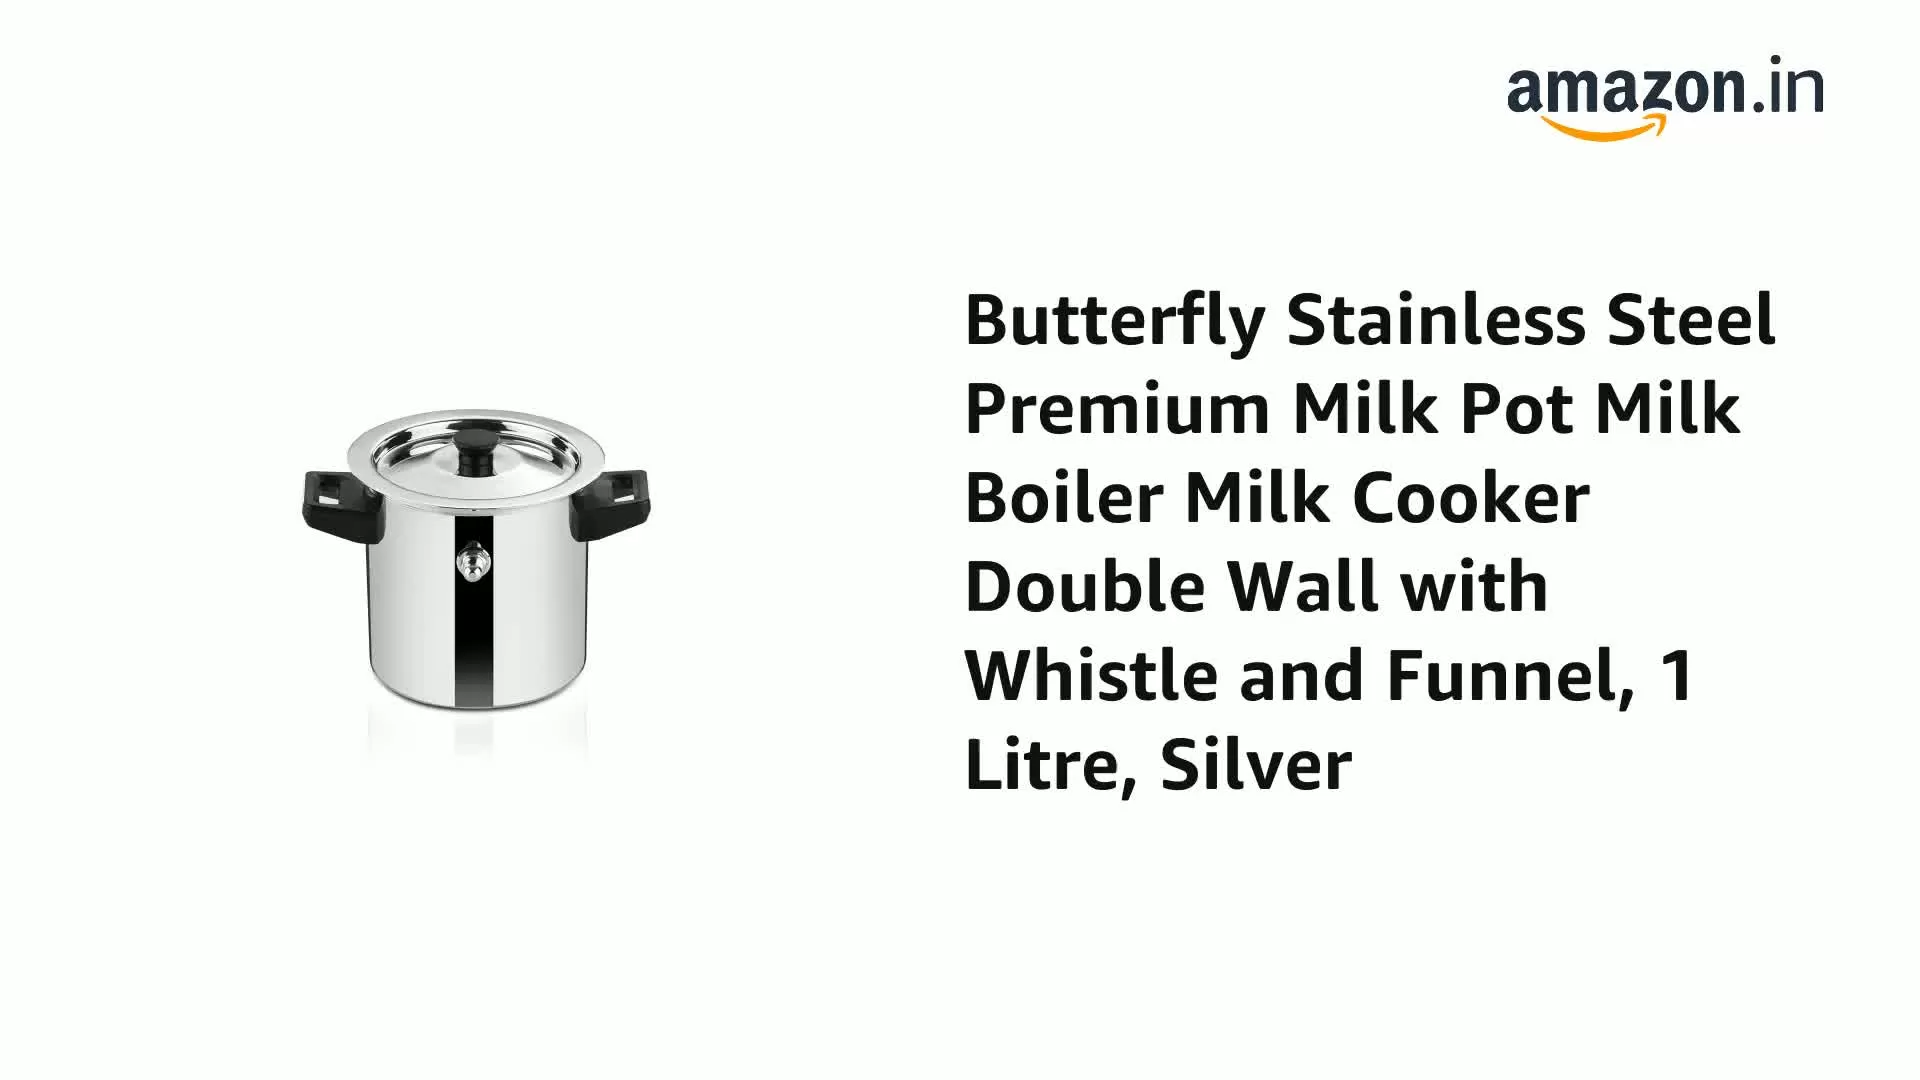 Butterfly Stainless Steel Premium Milk Pot Milk Boiler Milk Cooker Double Wall with Whistle and Funnel 1 Litre Silver, 2 image